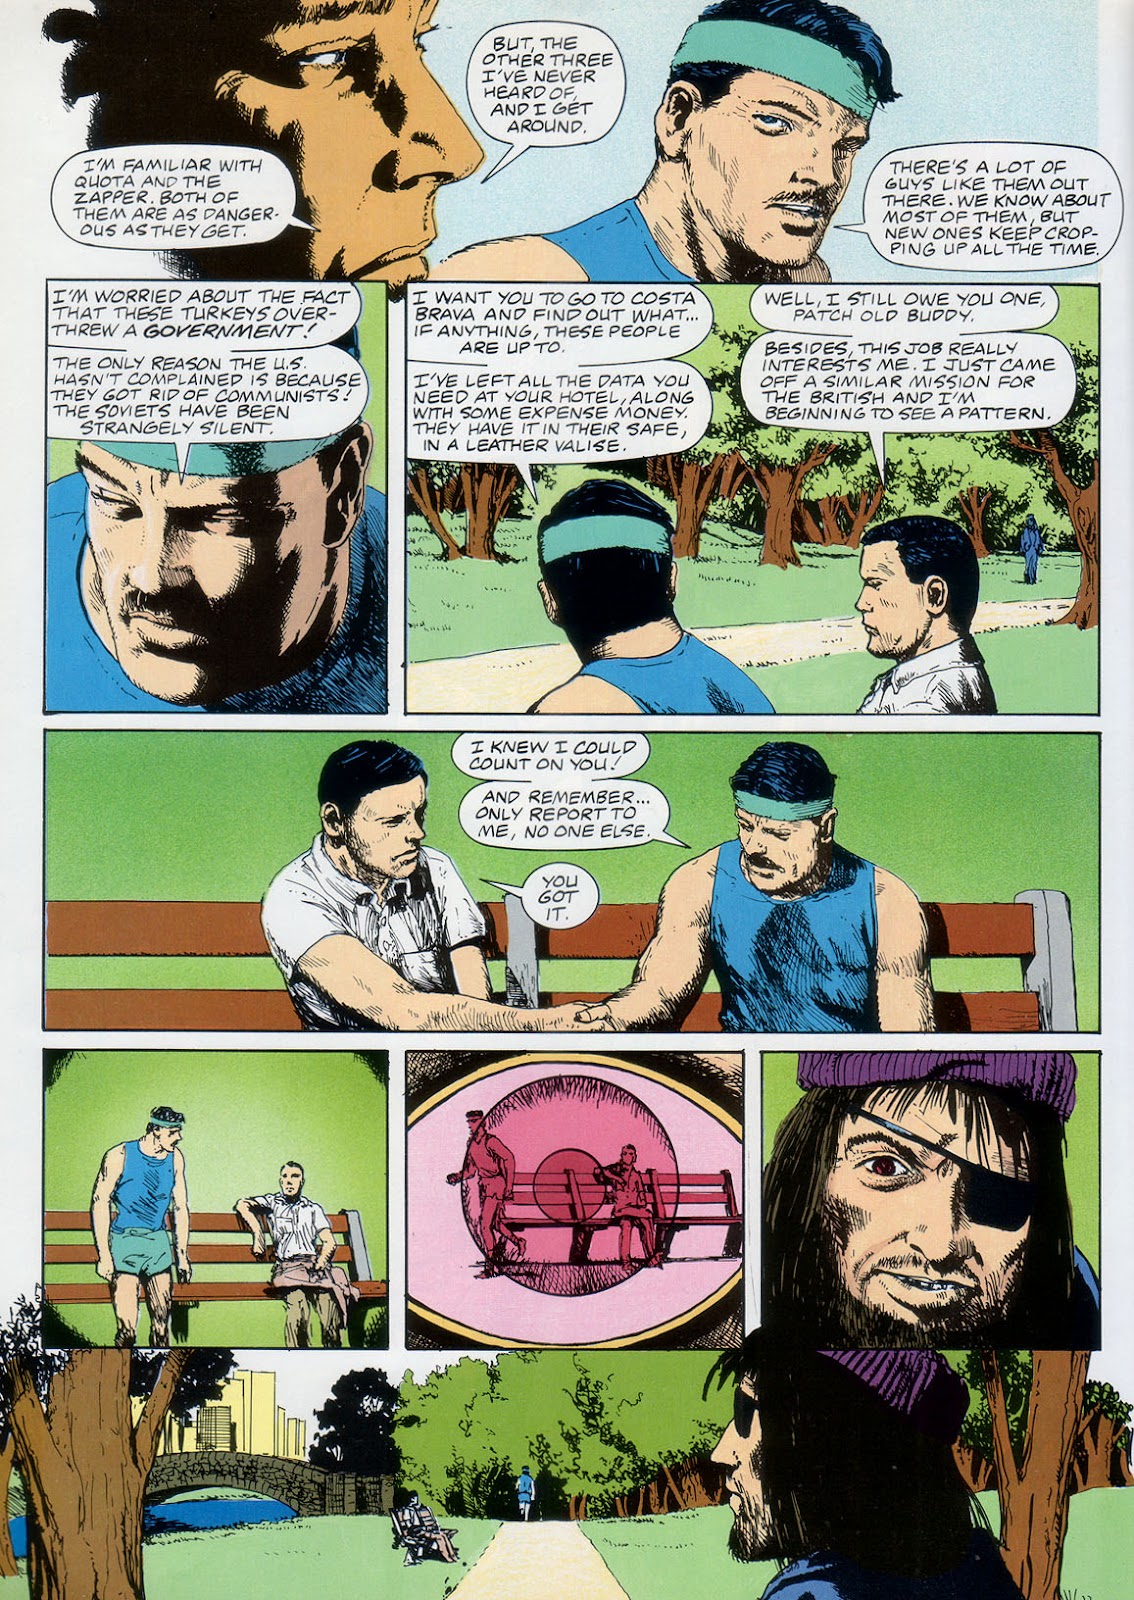 Marvel Graphic Novel issue 57 - Rick Mason - The Agent - Page 28